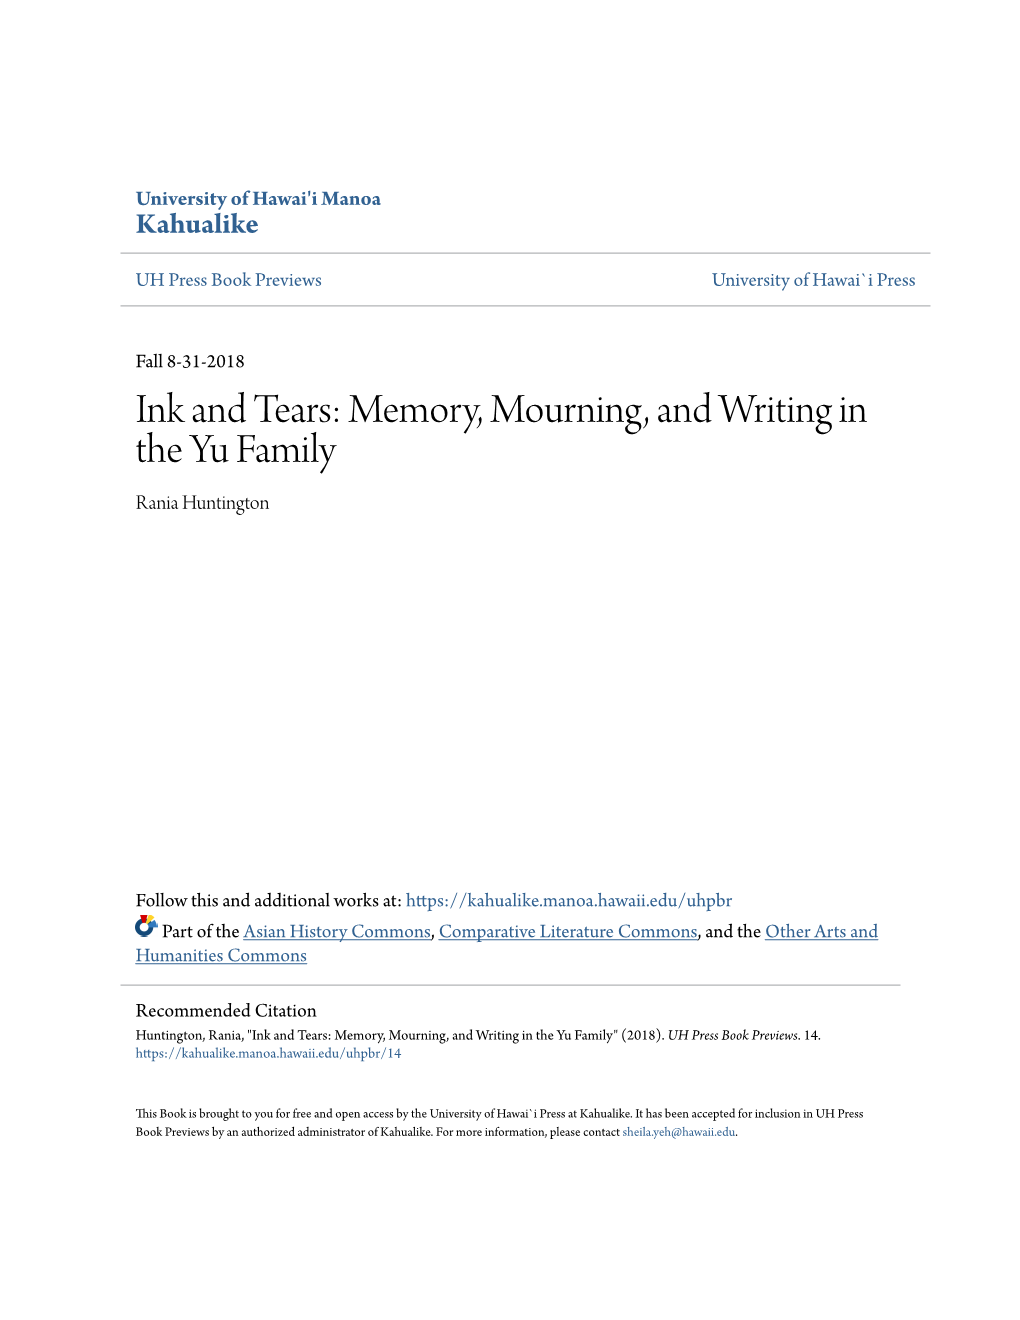 Ink and Tears: Memory, Mourning, and Writing in the Yu Family Rania Huntington